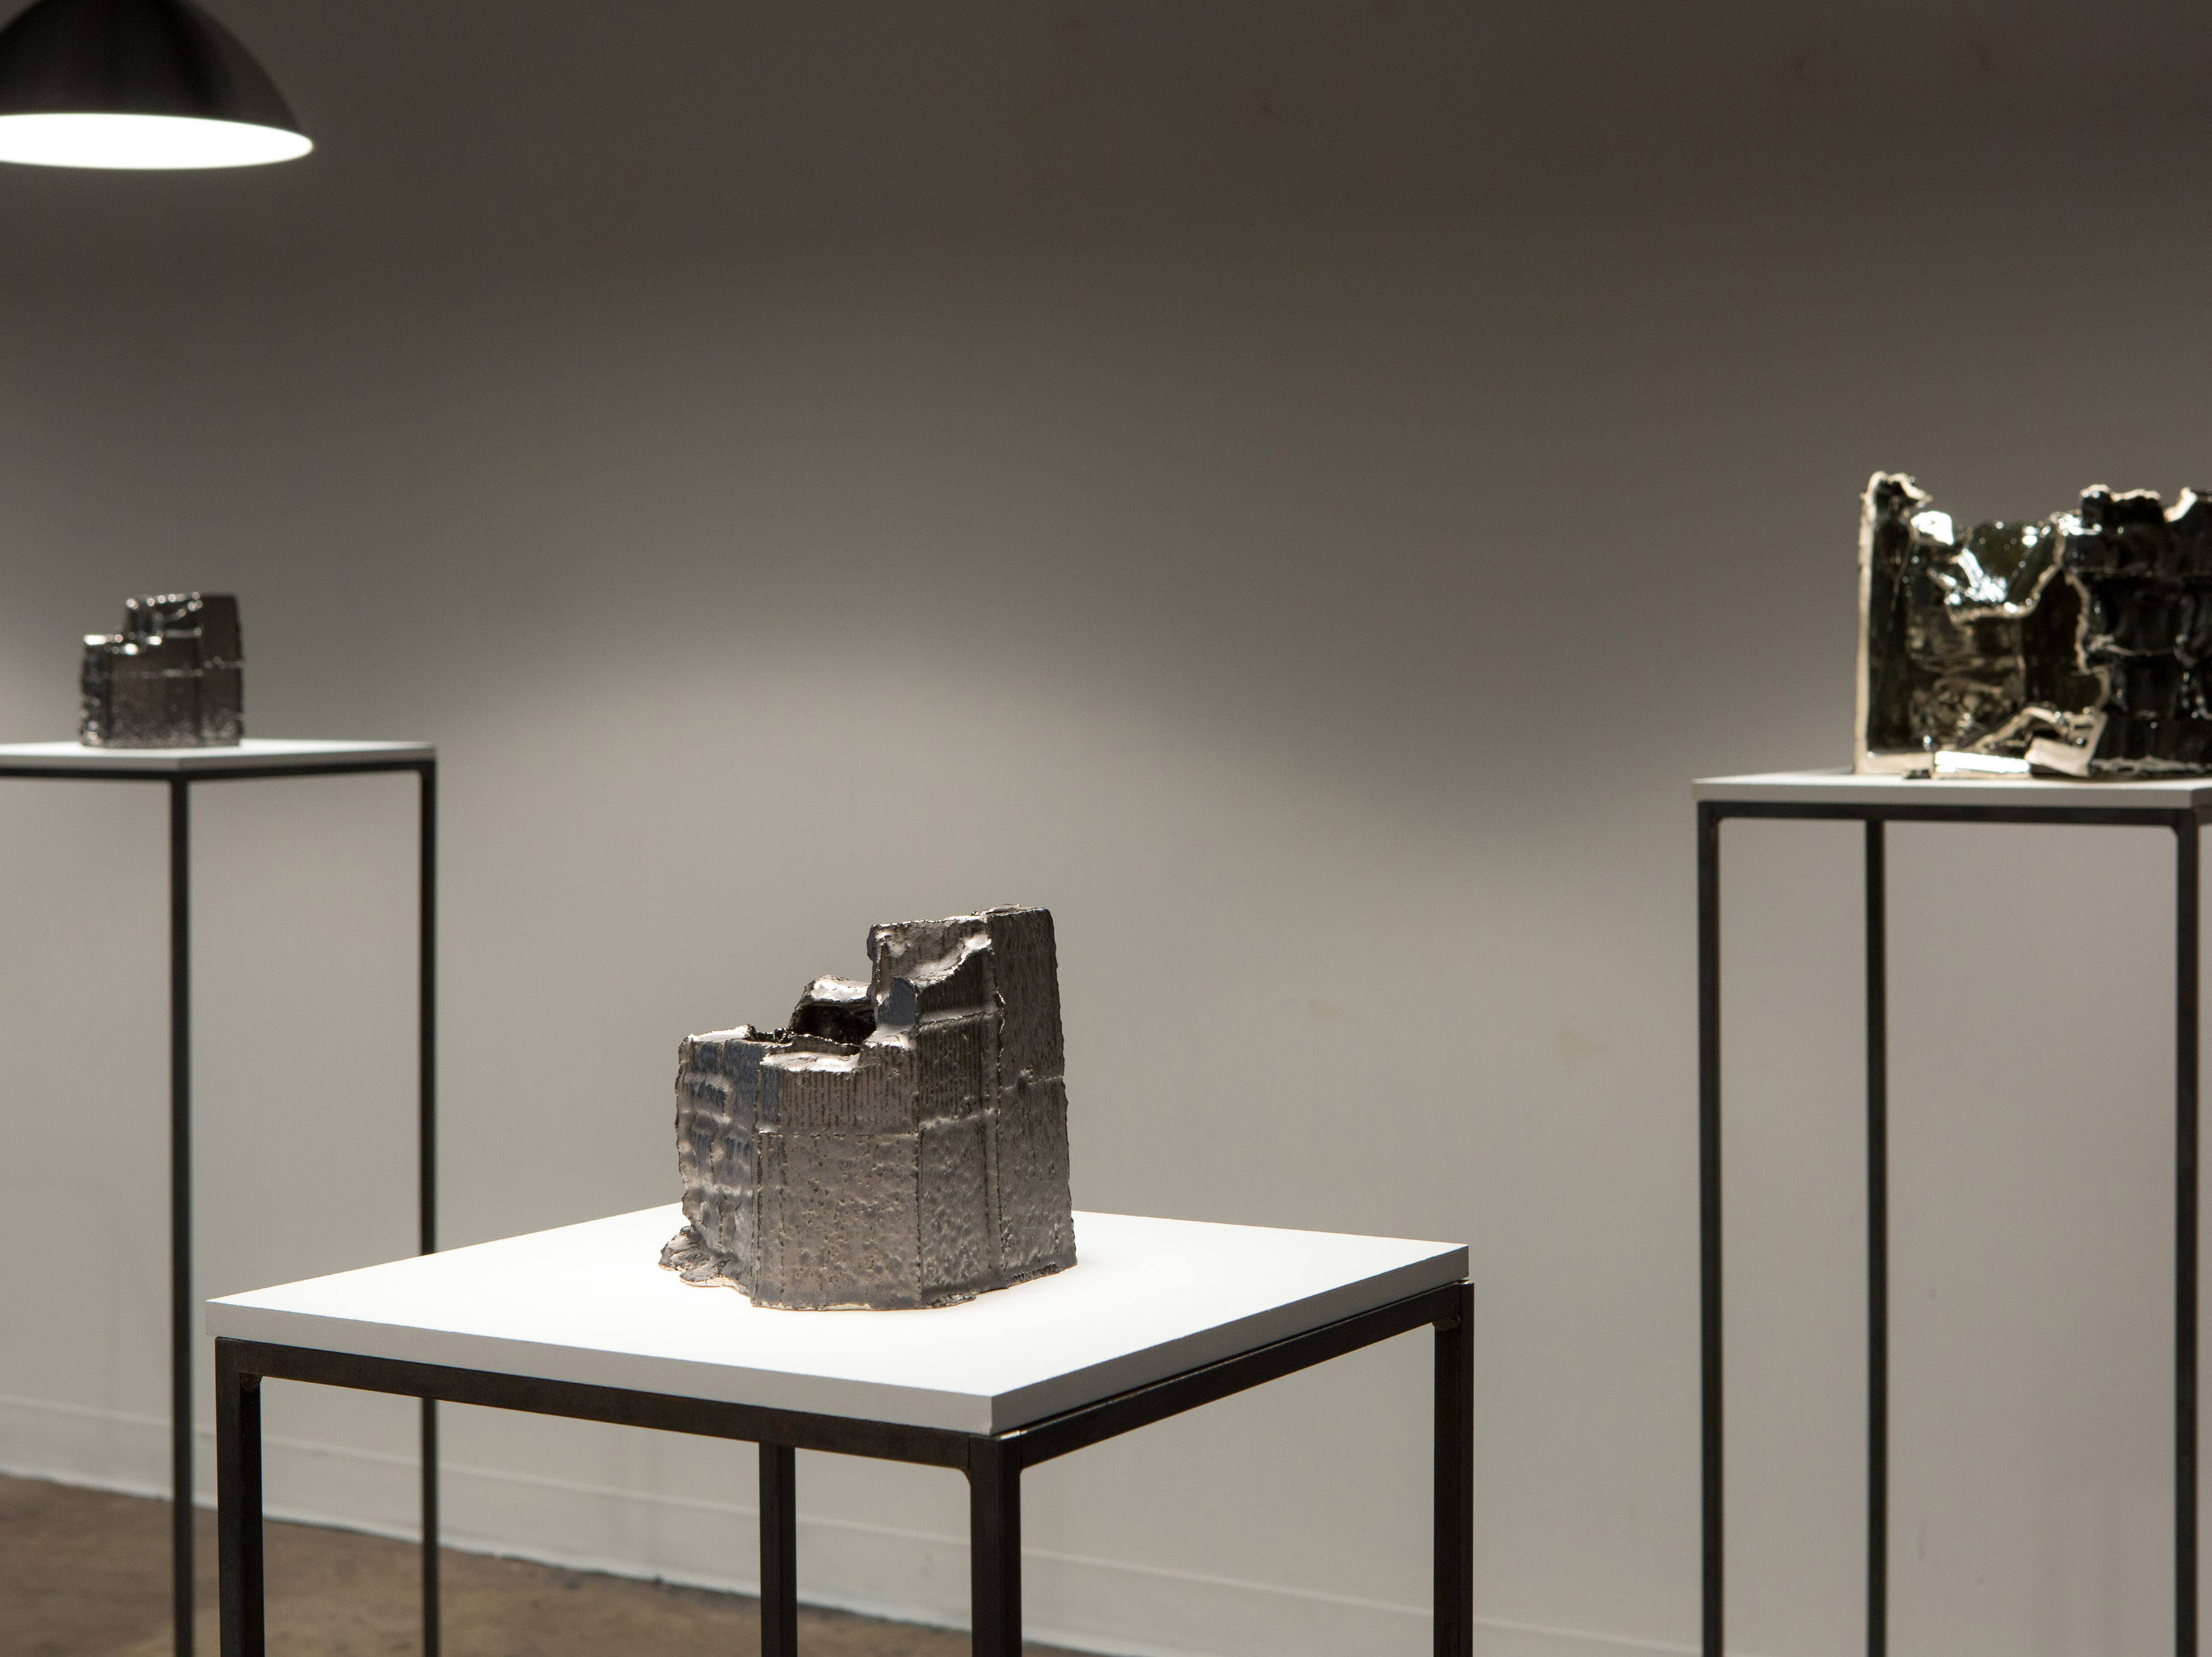 3 plinths in a gallery setting, displaying metallic structures in the shapes of cubes.